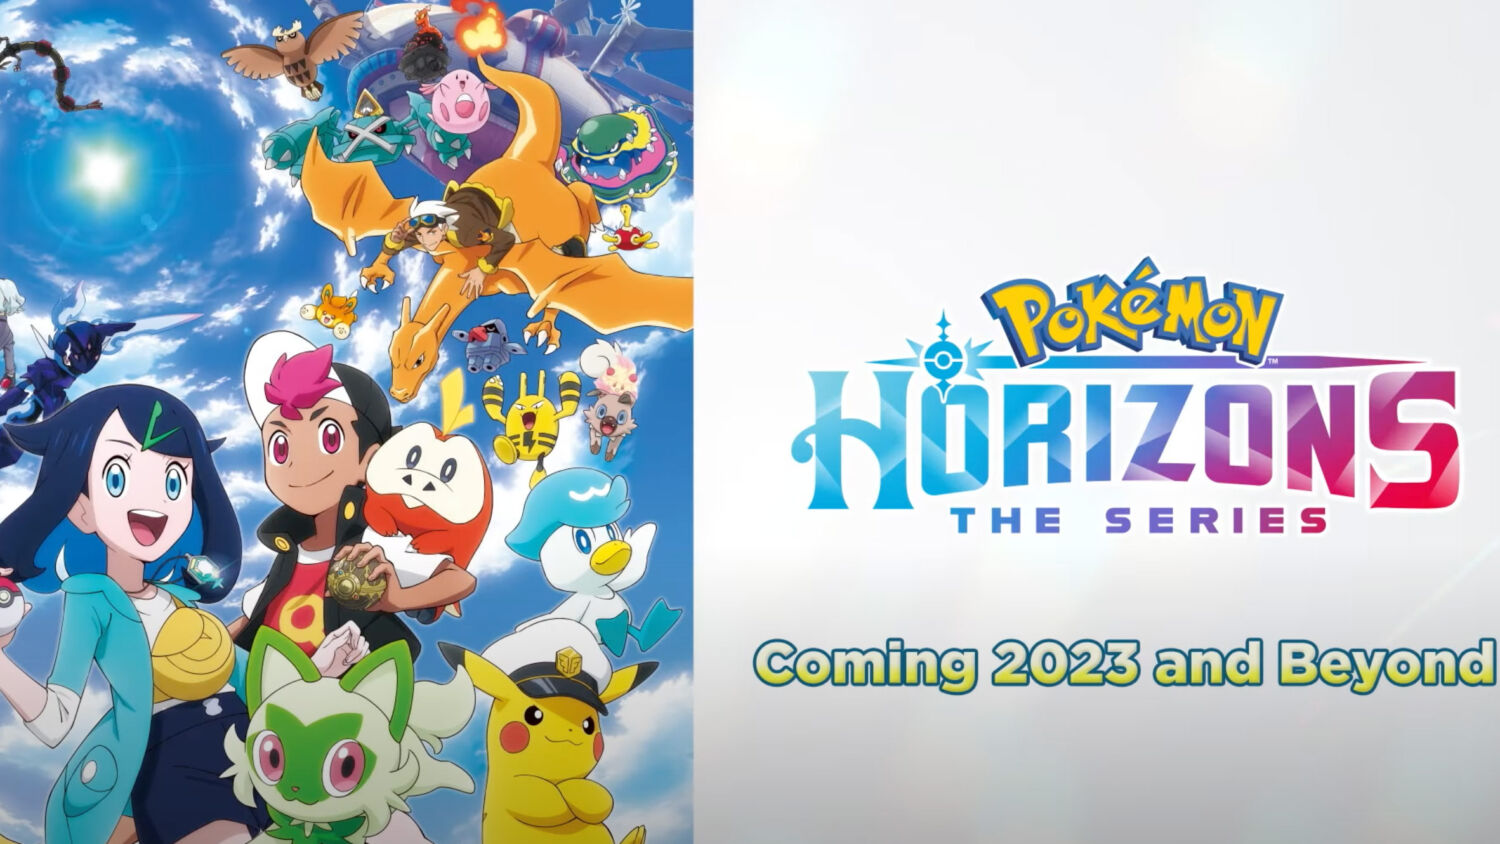 ‘Pokémon Horizons: The Series’ Ushers In A New Chapter For Pokémon